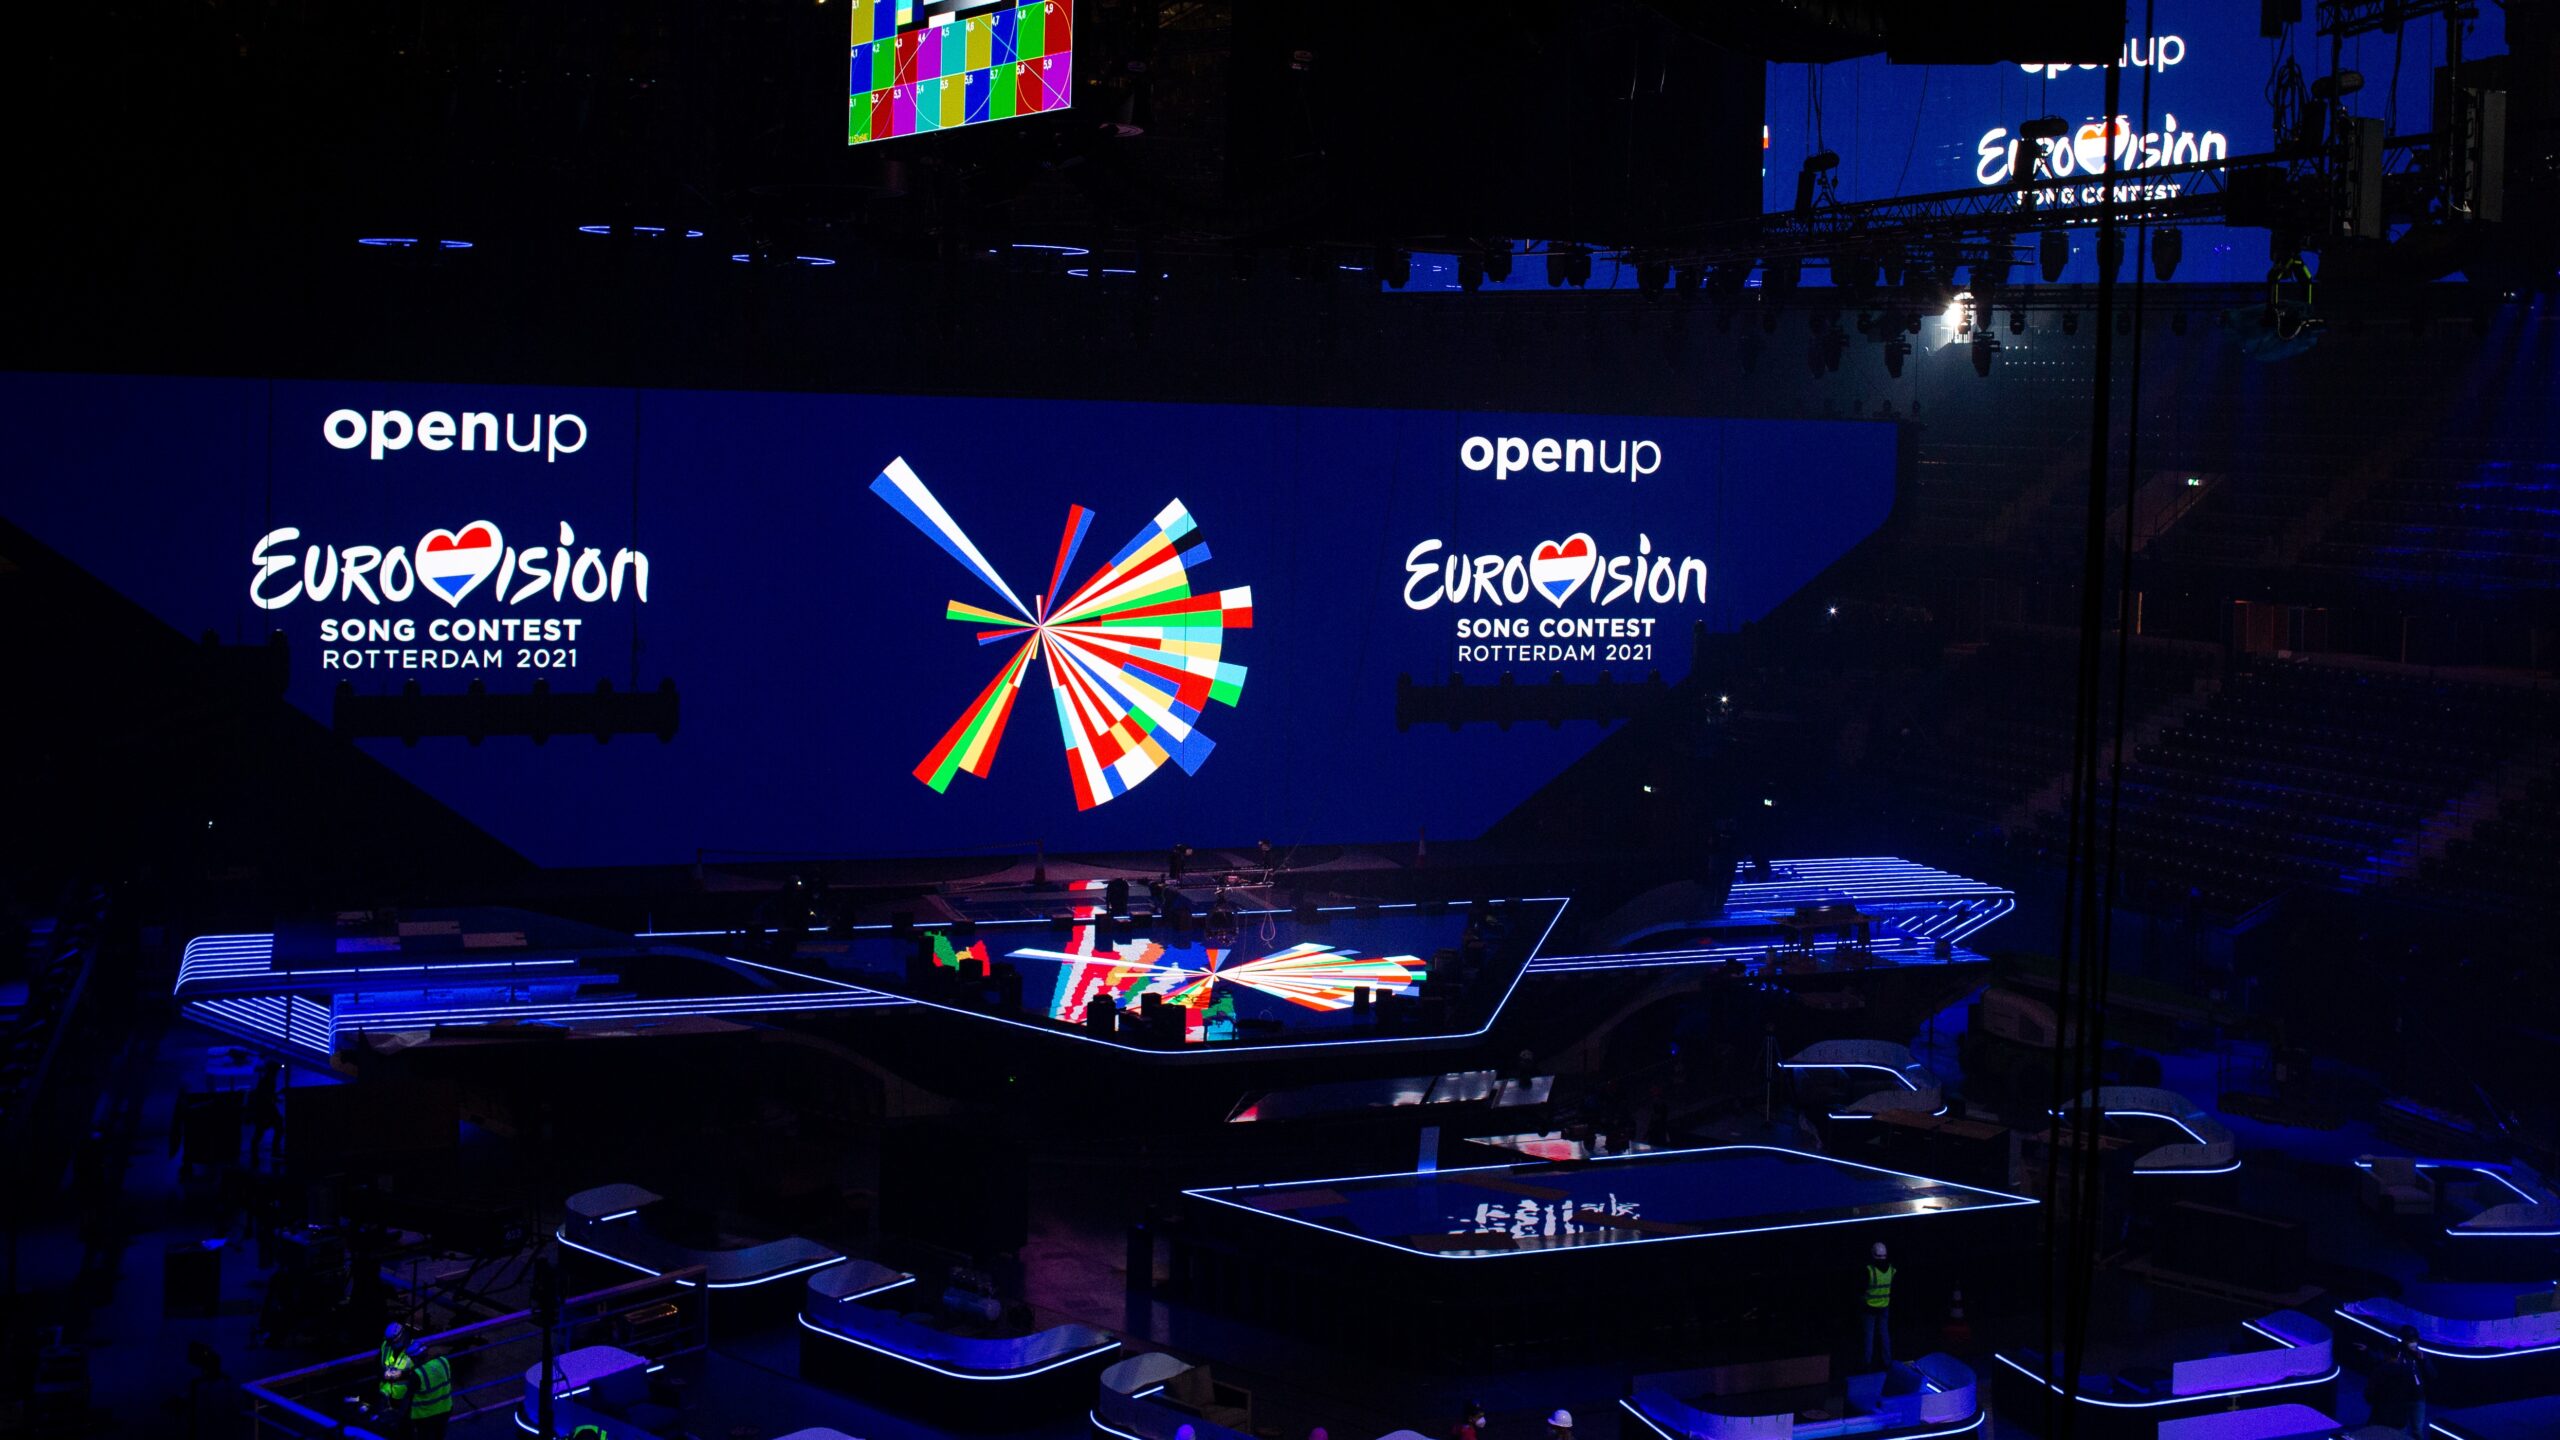 Eurovision 2021: On April 28th 2021 the decision whether there will be an audience will be made